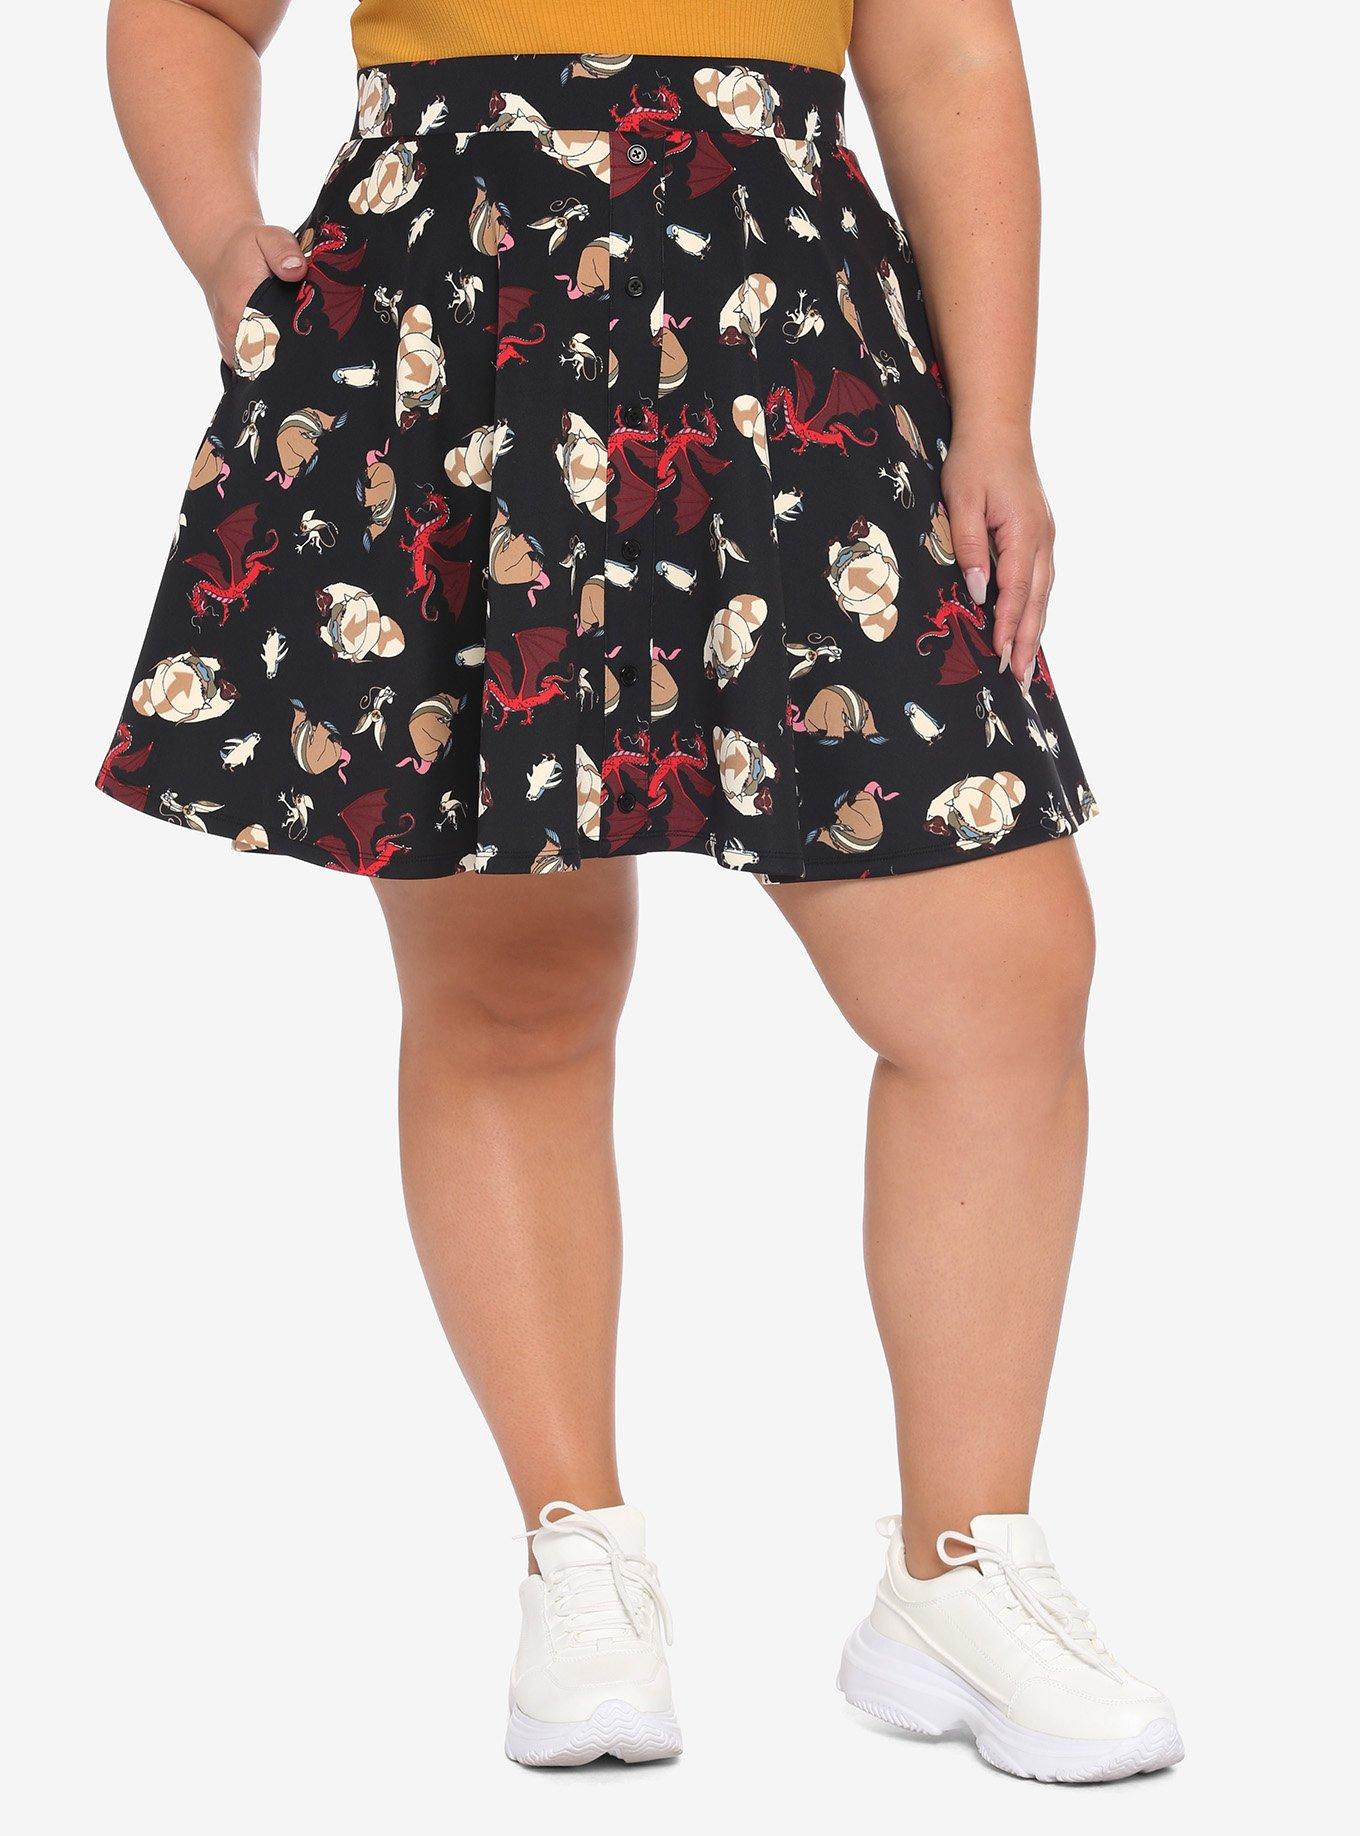 Avatar: The Last Airbender Button-Front Skater Skirt Plus Size, MULTI, hi-res